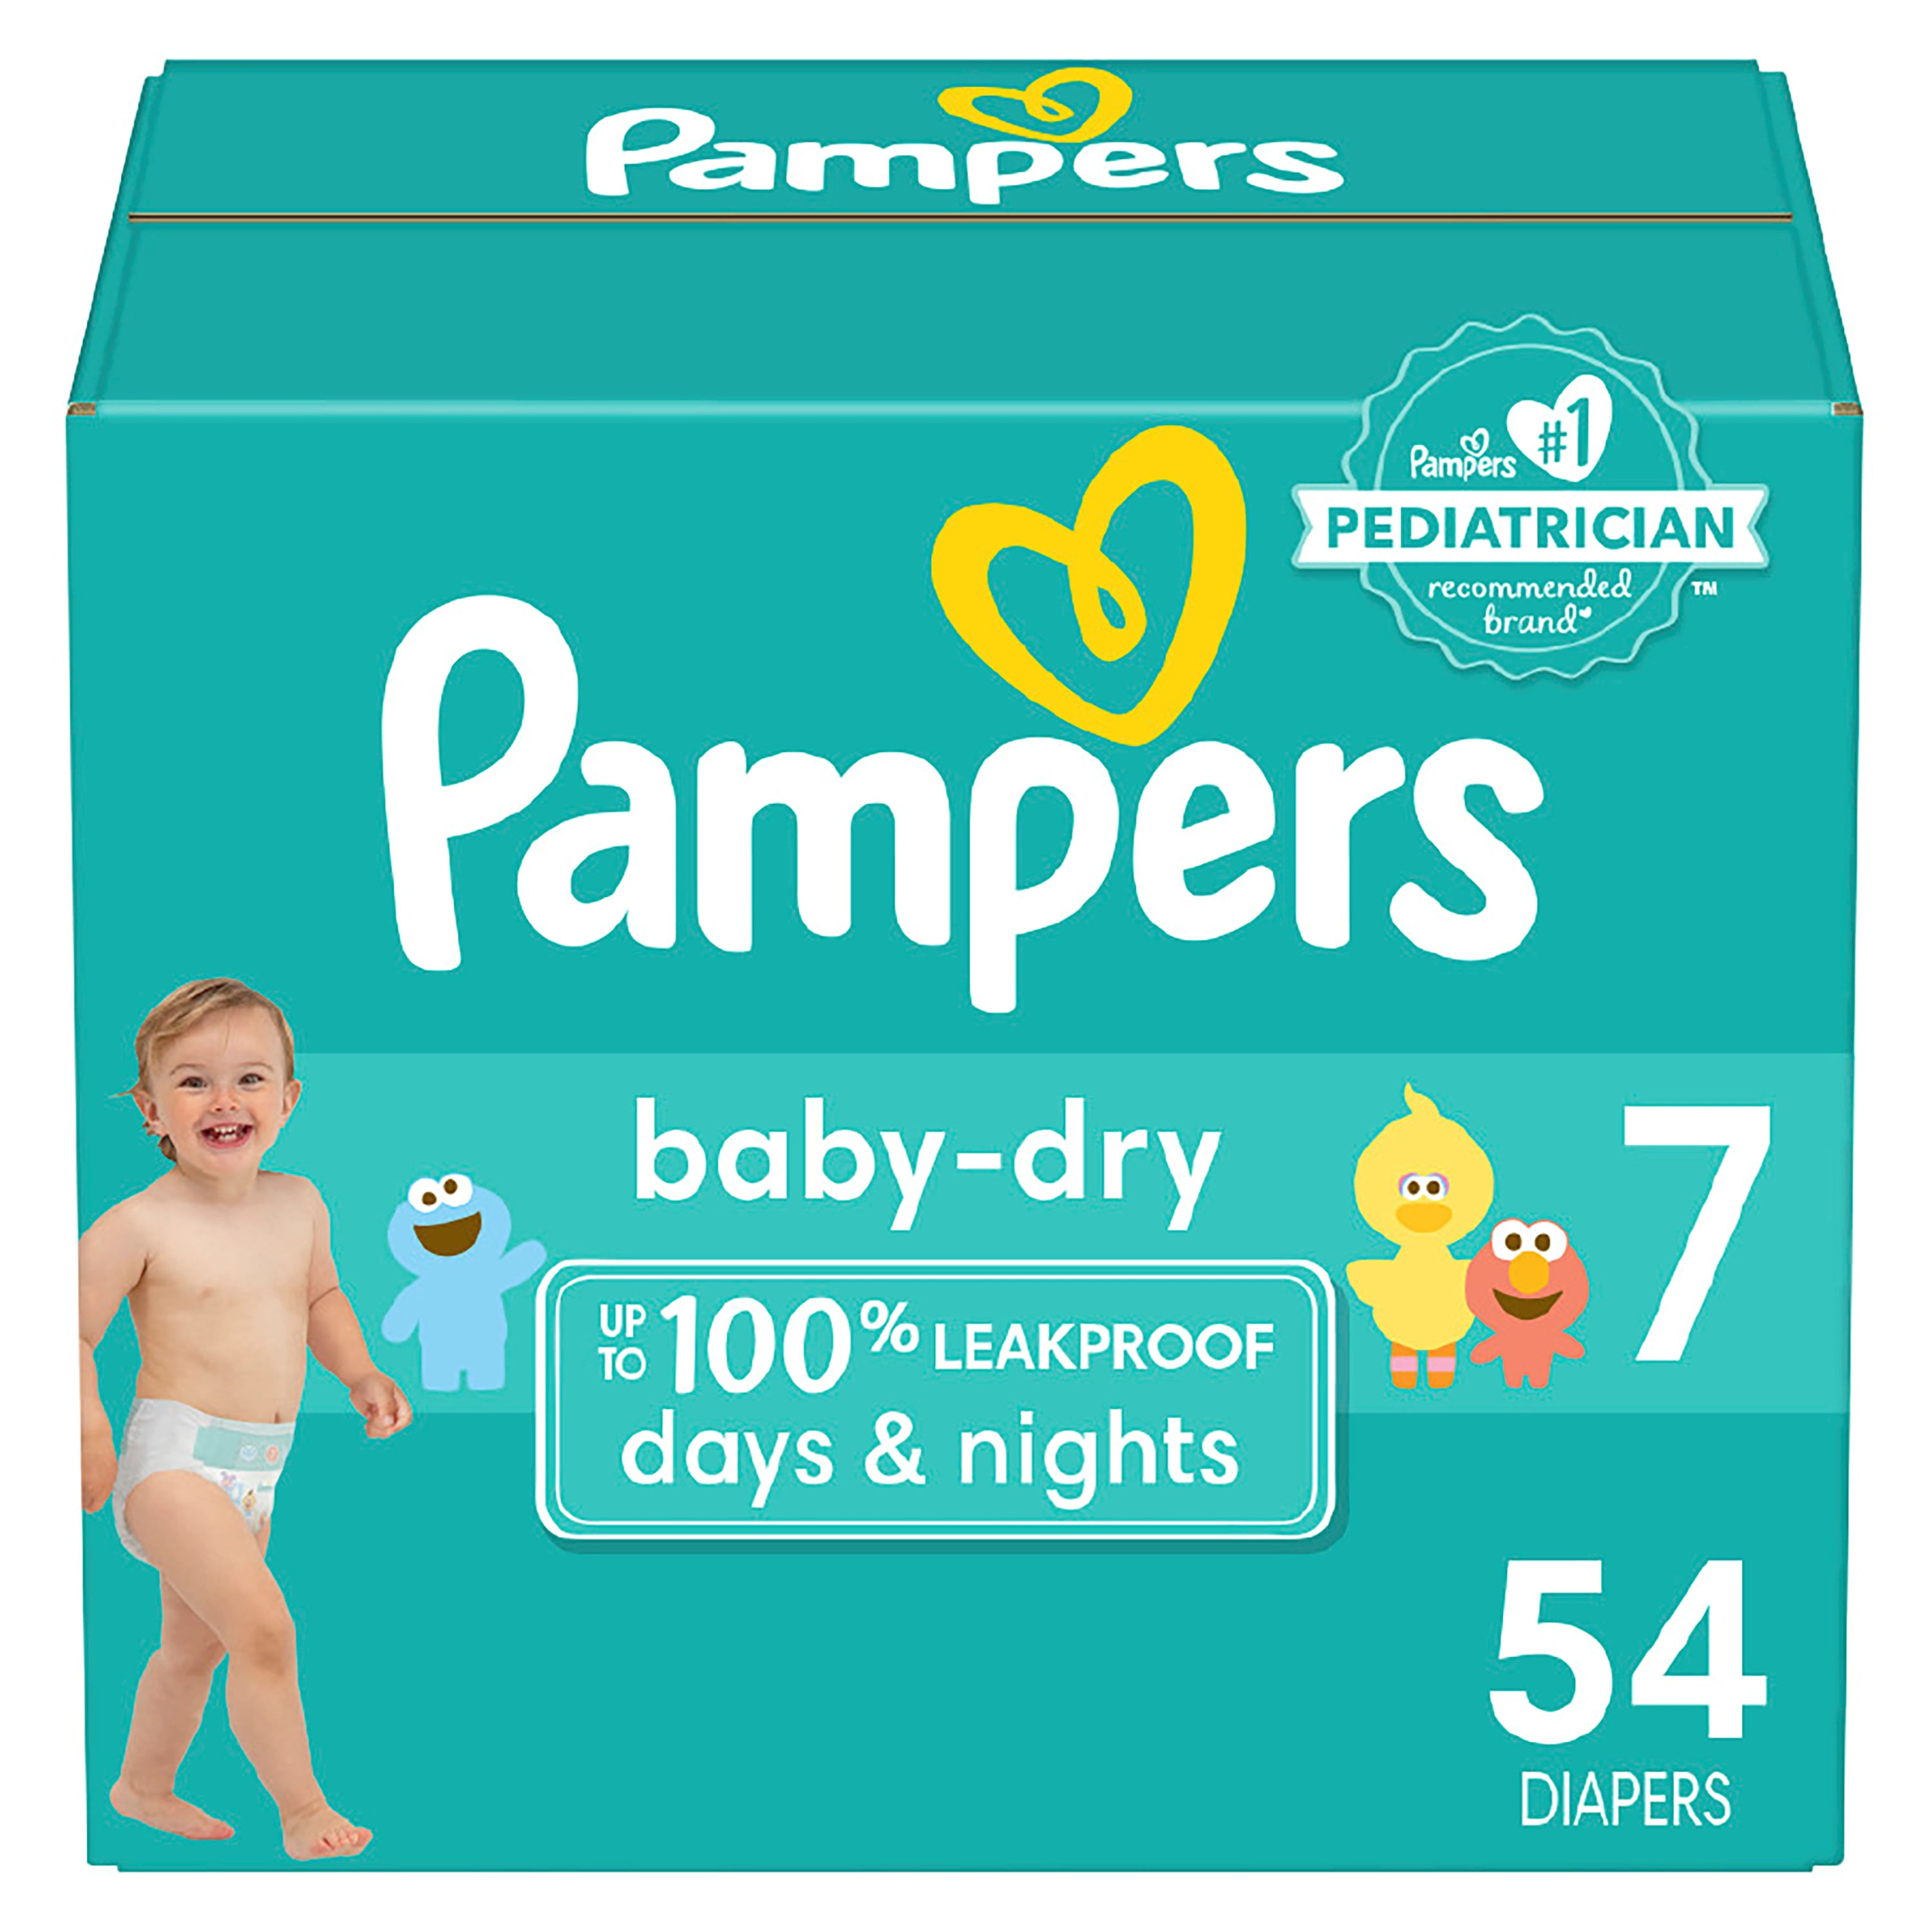 Pampers Pure Protection - Pañales desechables, talla 0, 31 unidades